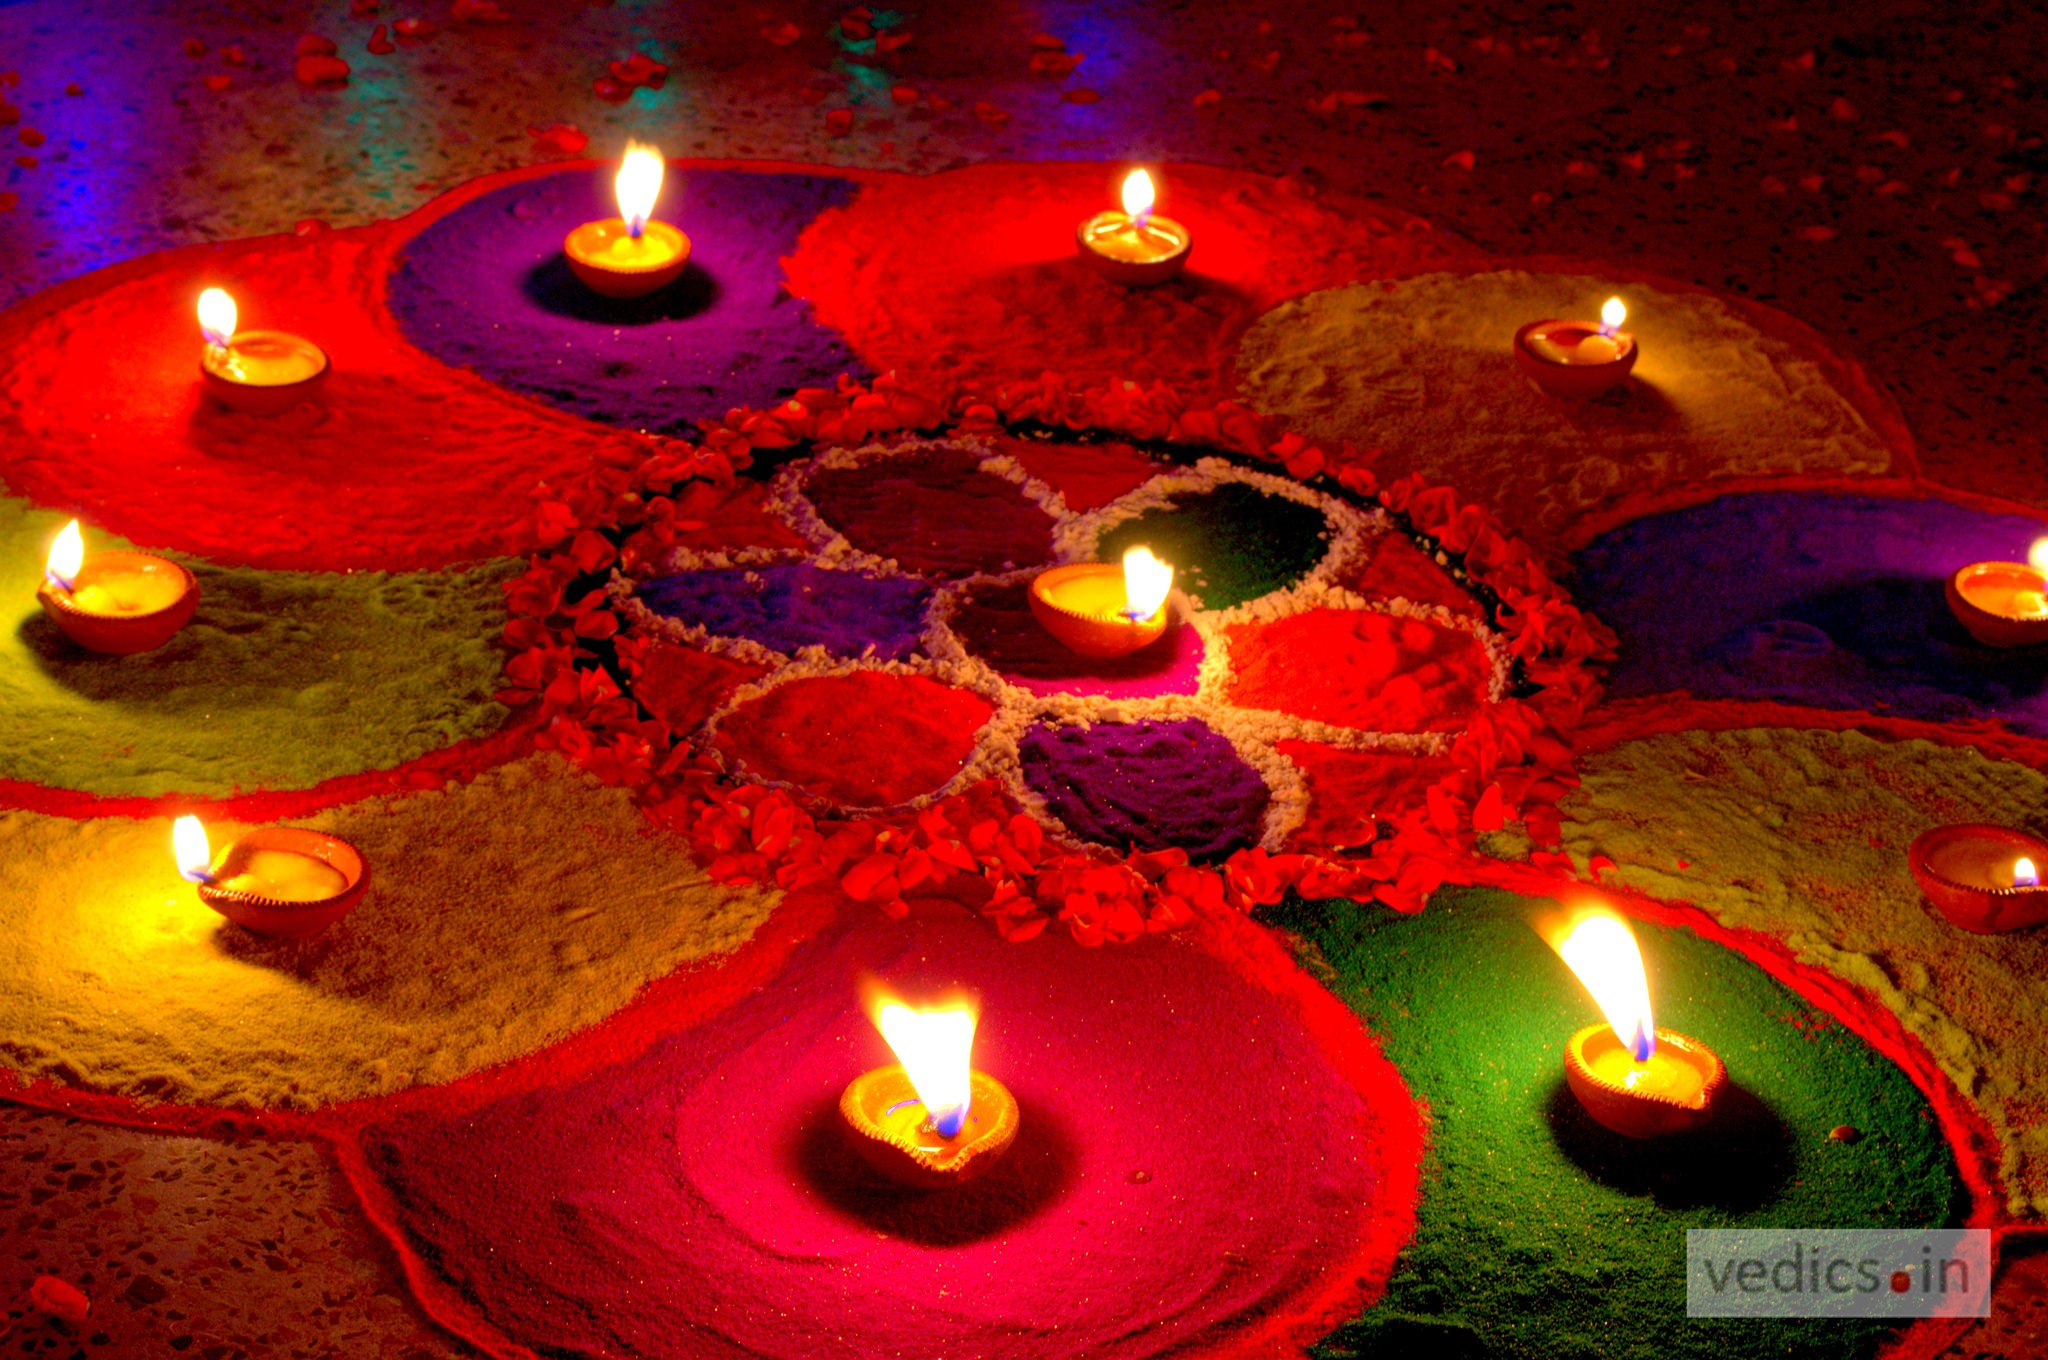 Diwali Festival & its Significance (Things we should know) Vedics